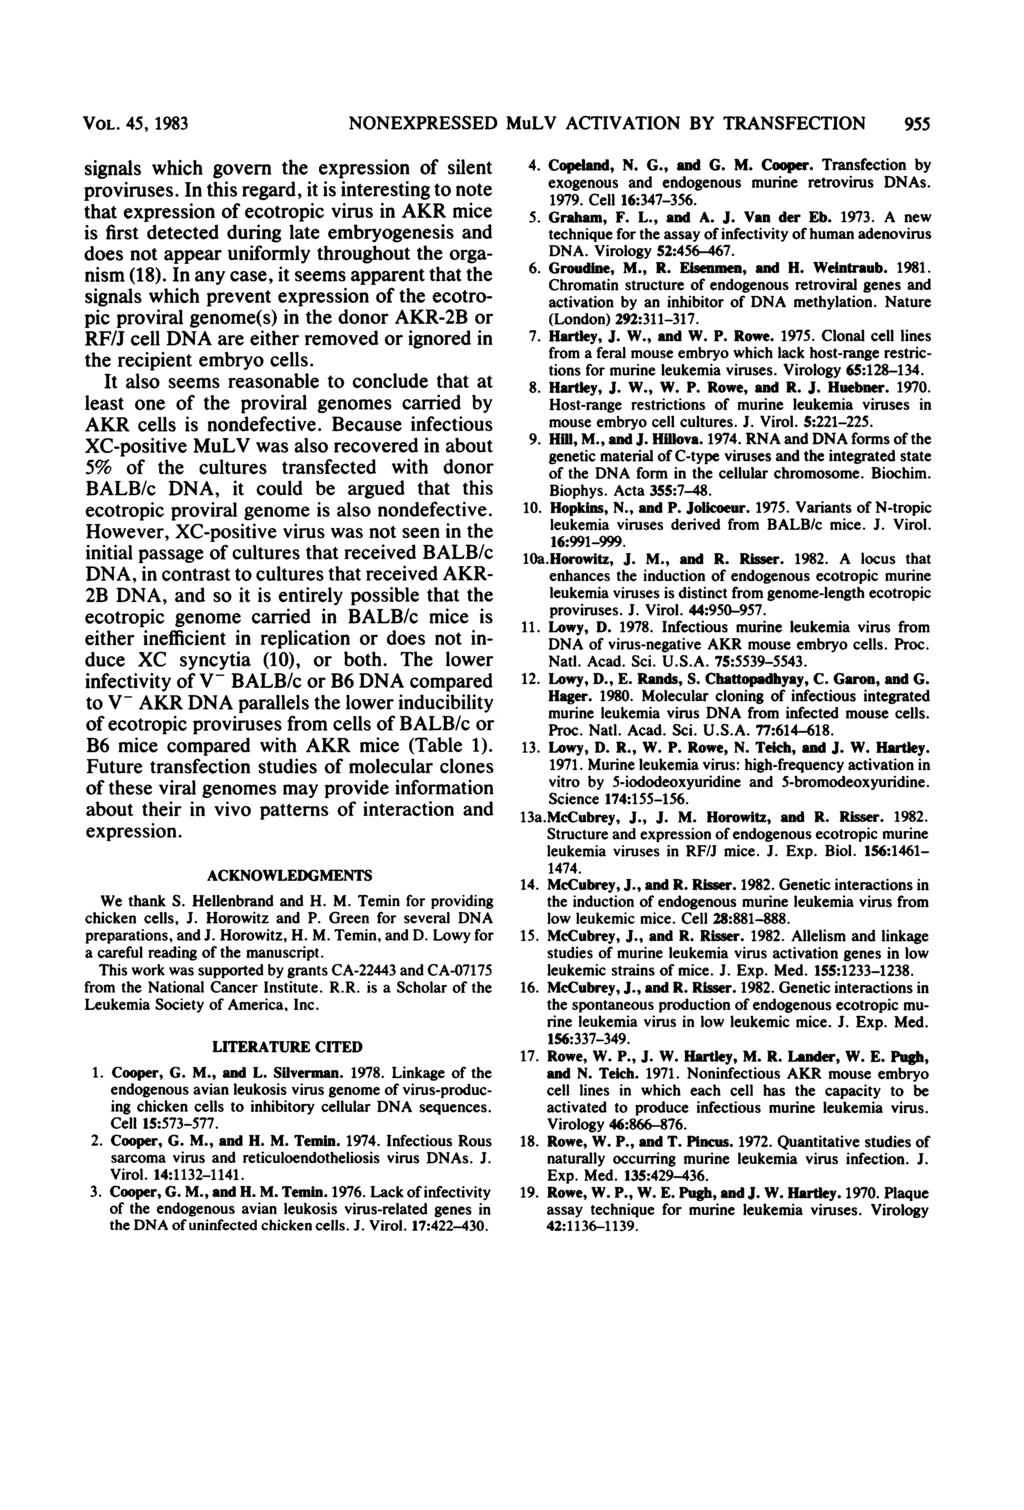 VOL. 45, 1983 signals which govern the expression of silent proviruses.